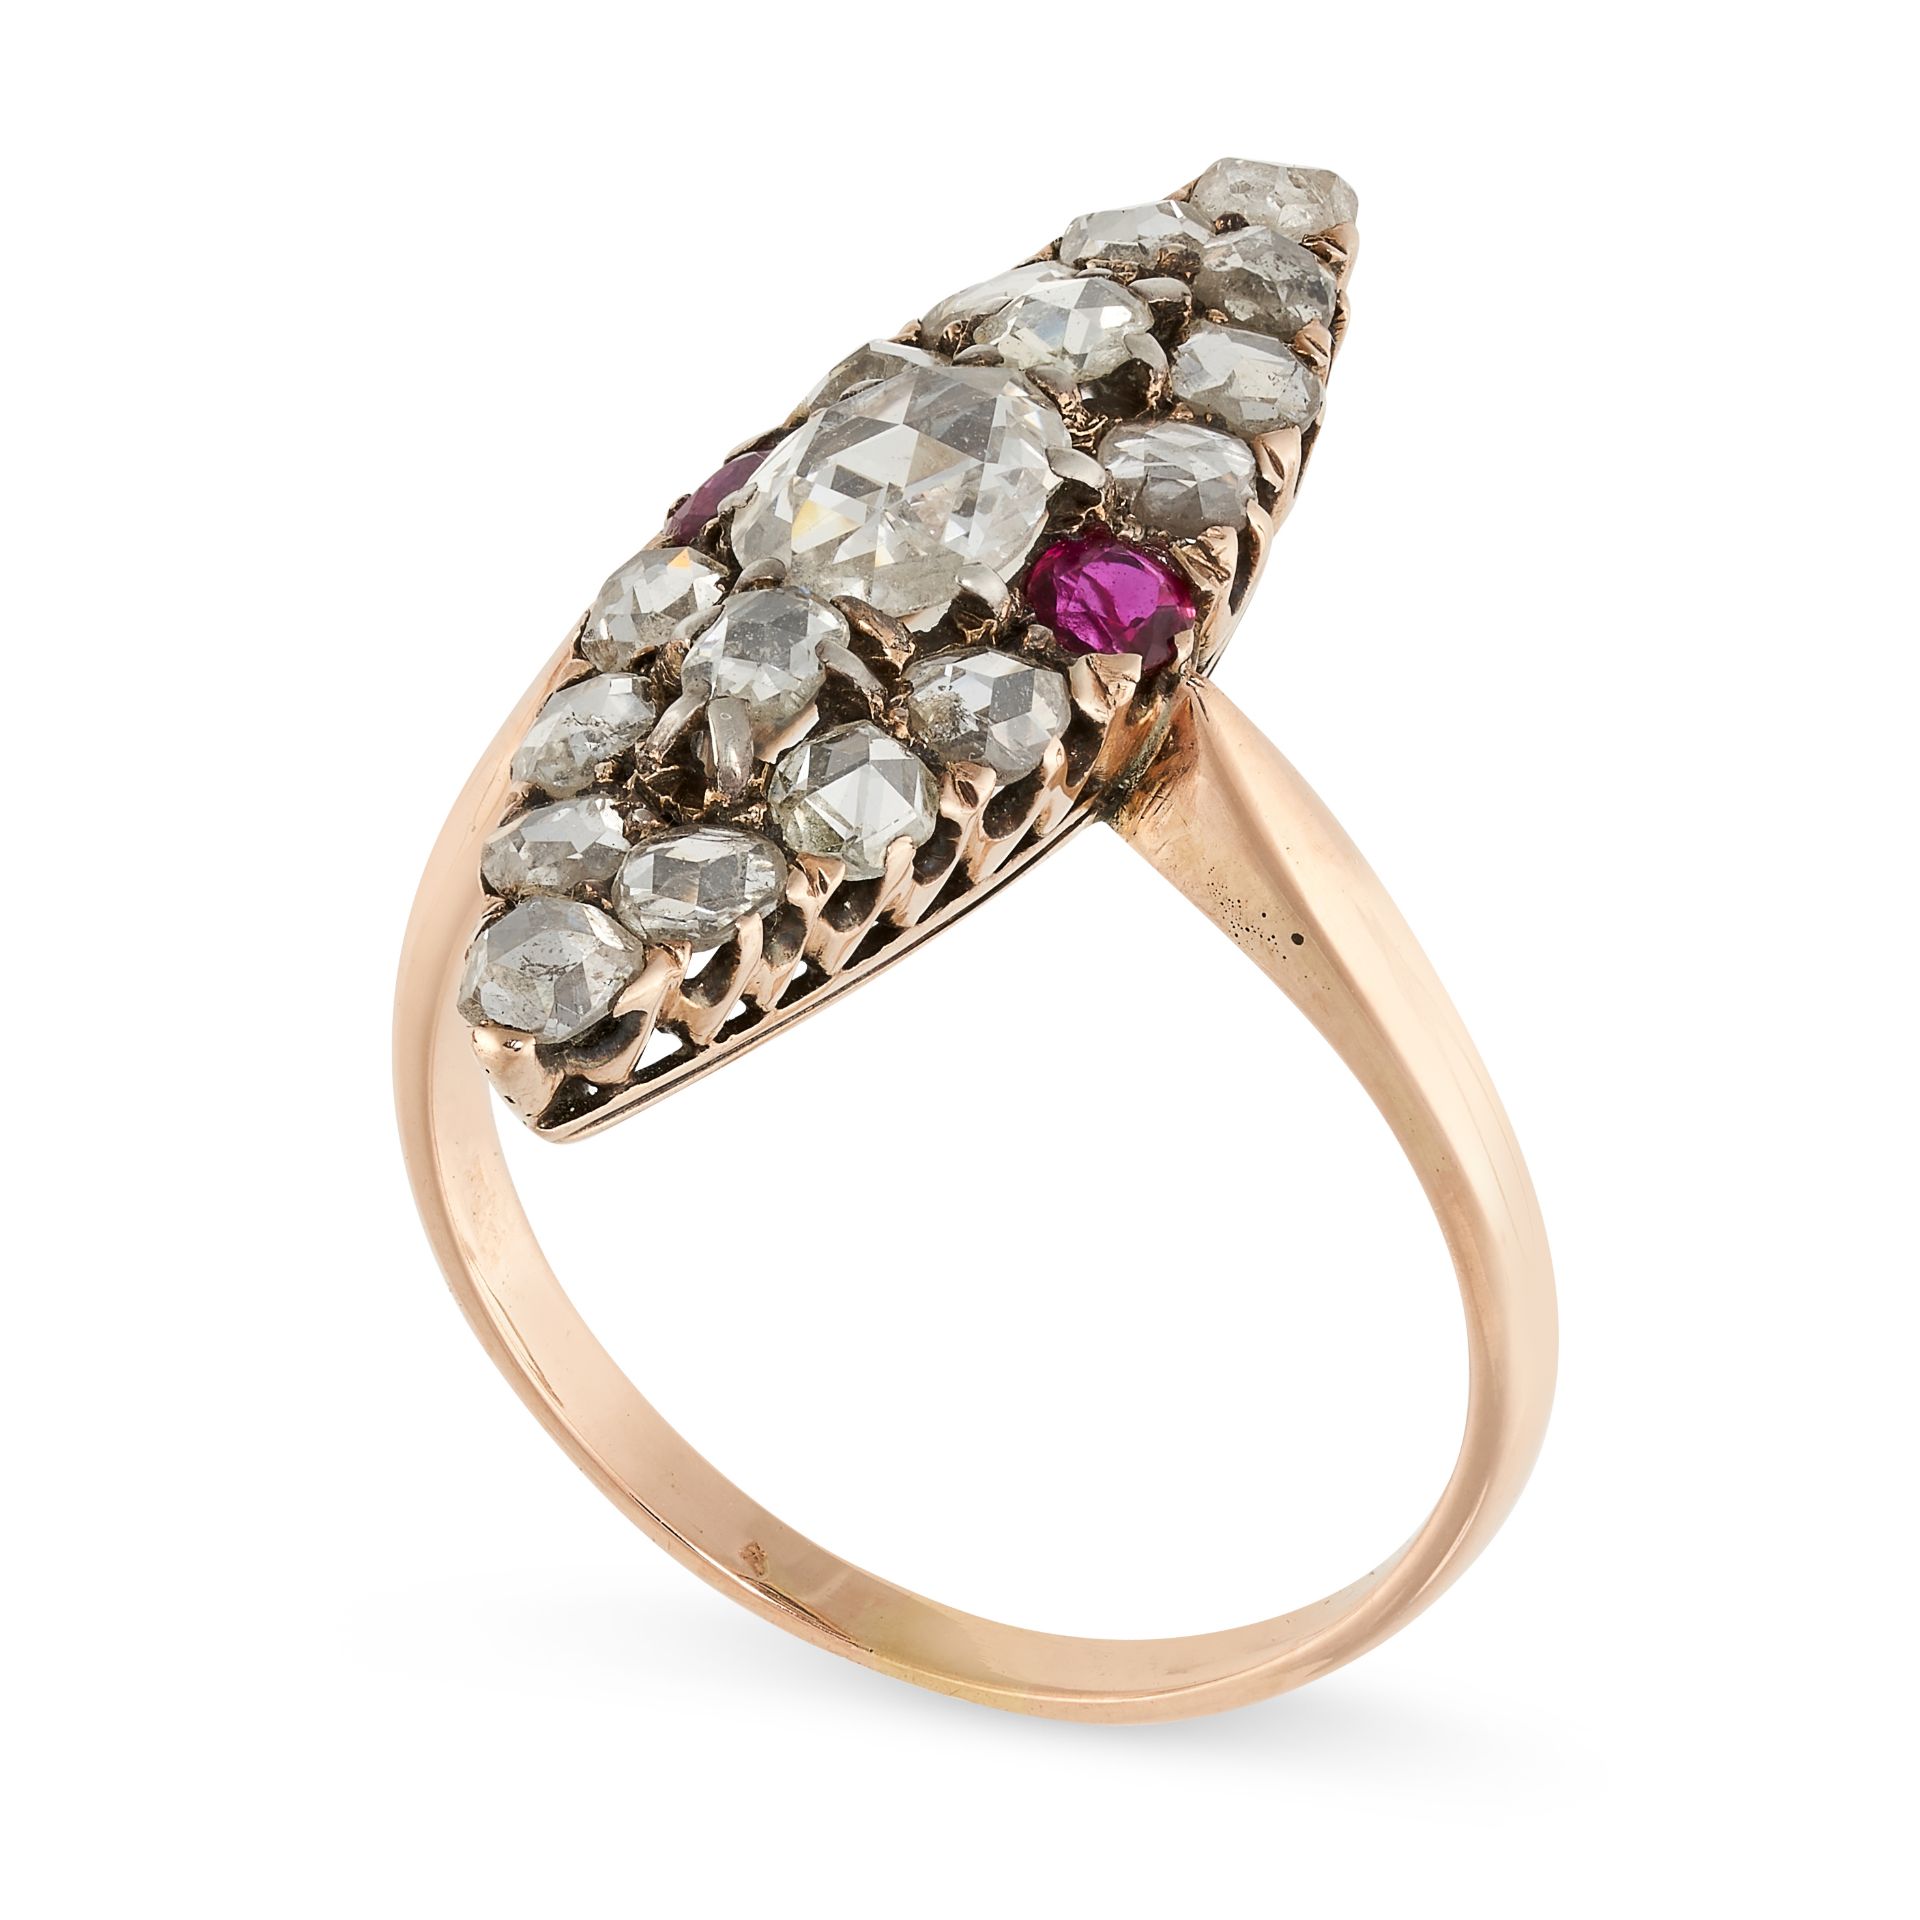 NO RESERVE - AN ANTIQUE DIAMOND AND RUBY RING in 18ct yellow gold and silver, the navette shaped - Image 2 of 2